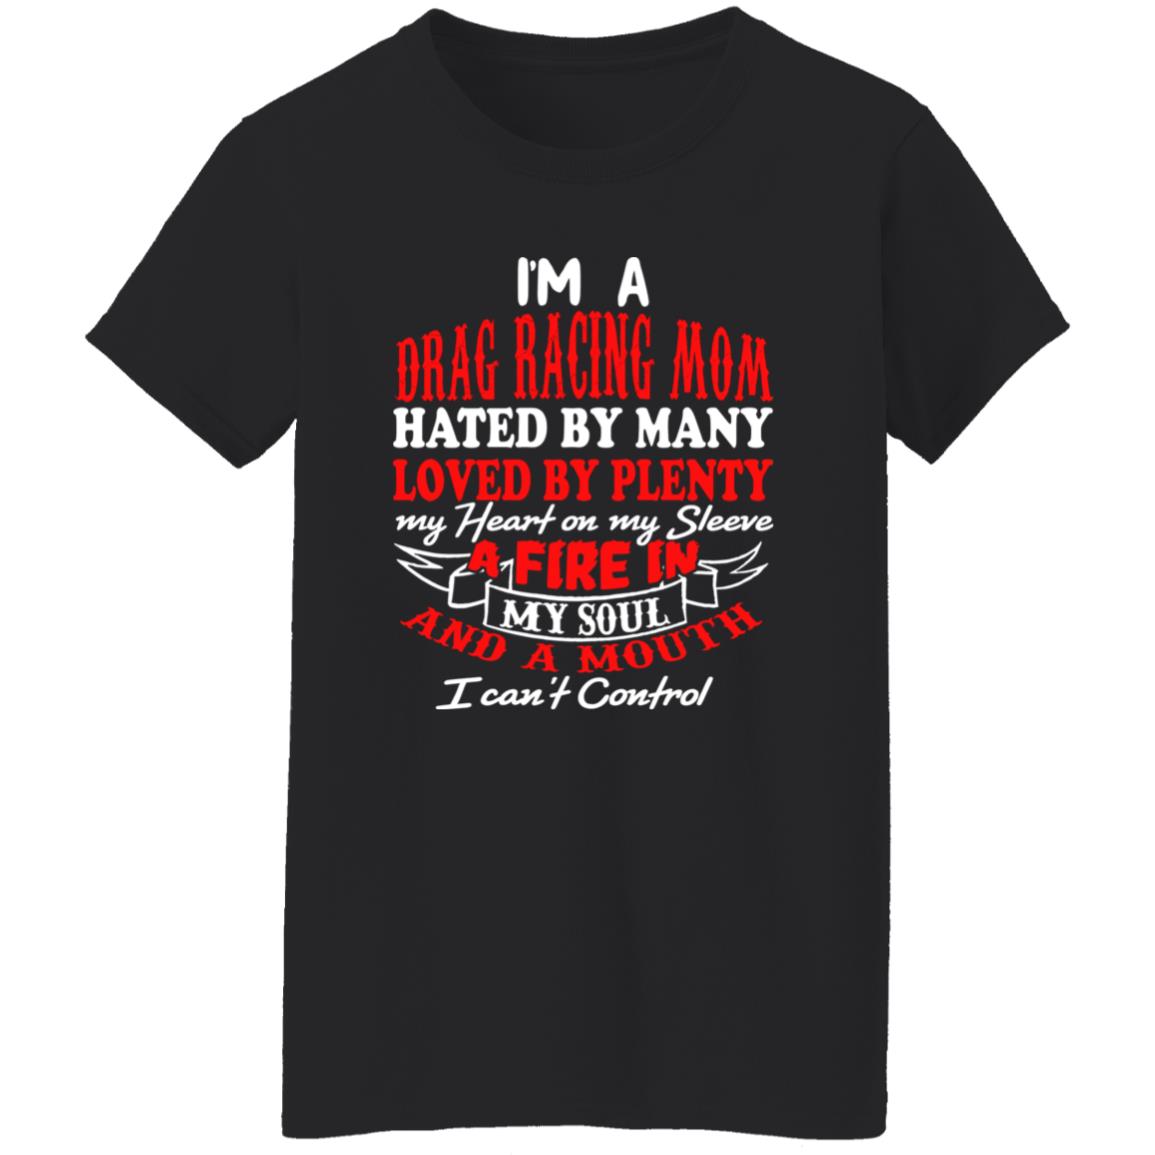 I'm A Drag Racing Mom Hated By Many Loved By Plenty Ladies' 5.3 oz. T-Shirt